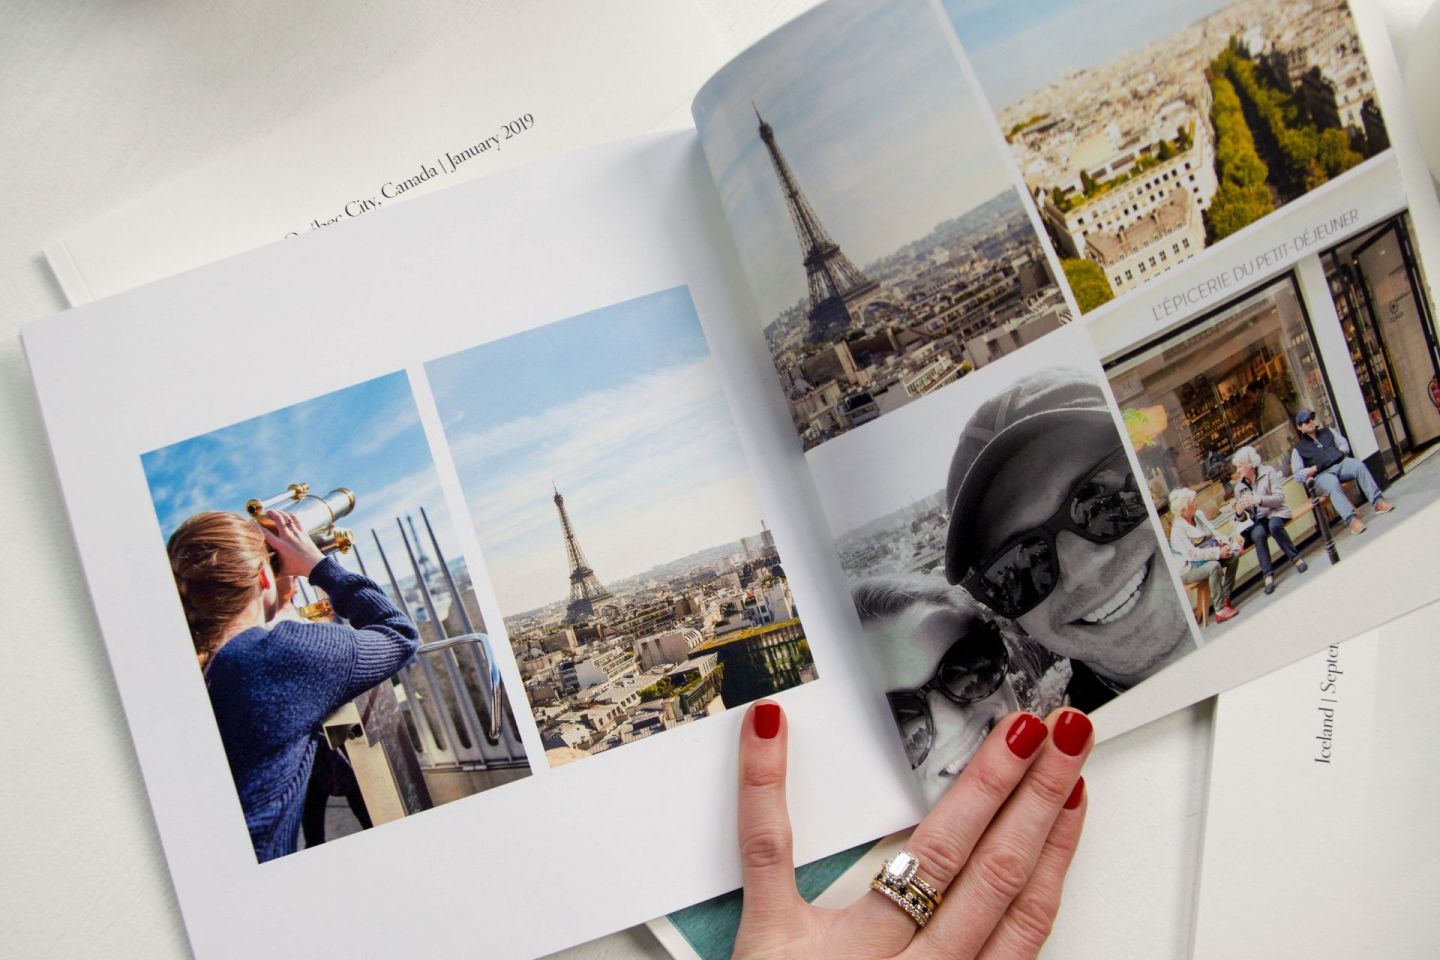 Review of a Travel Photography Book